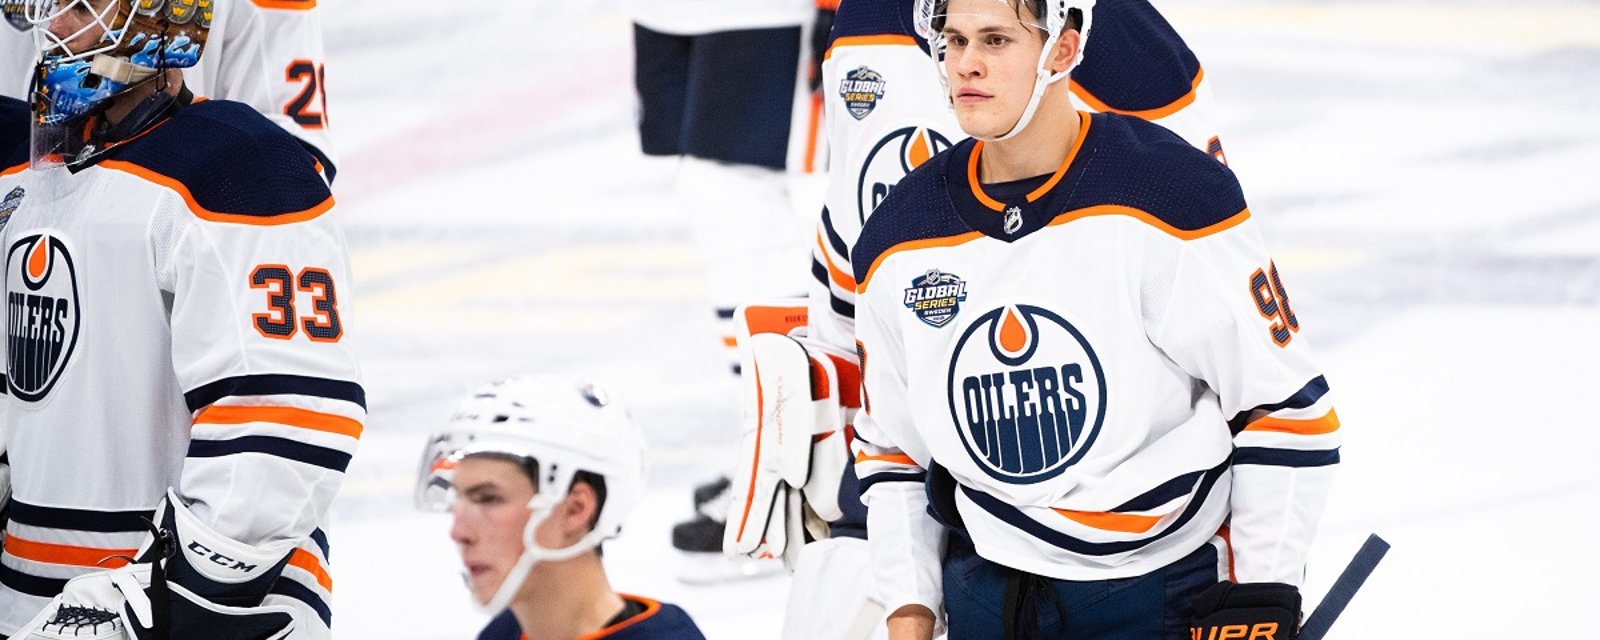 Breaking: Oilers place a player on waivers to avoid demoting Puljujarvi.